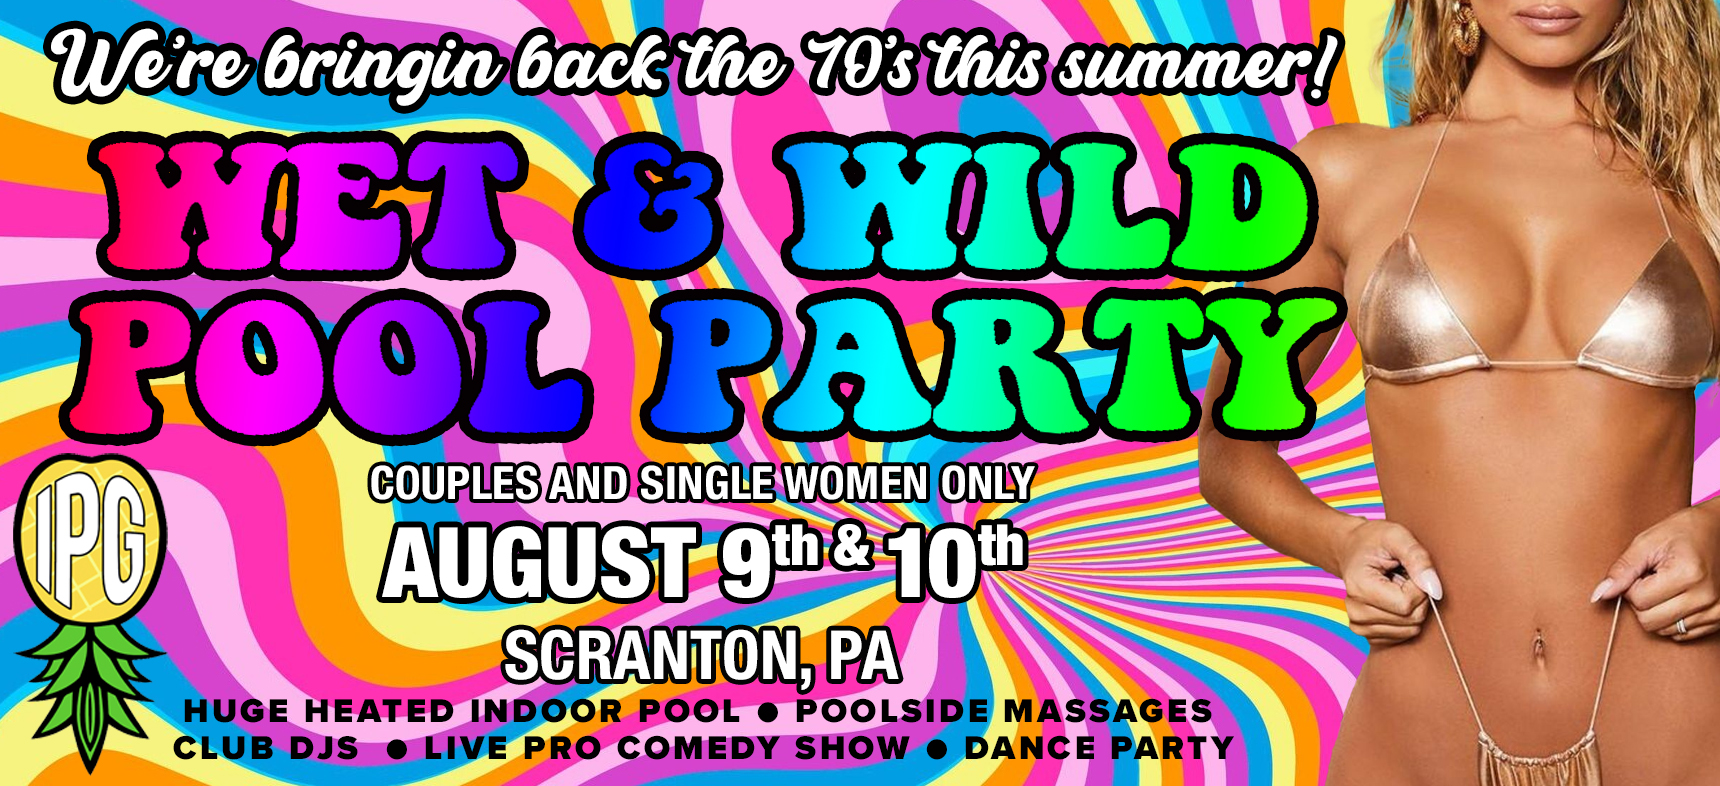 70's_PoolParty_788x1720